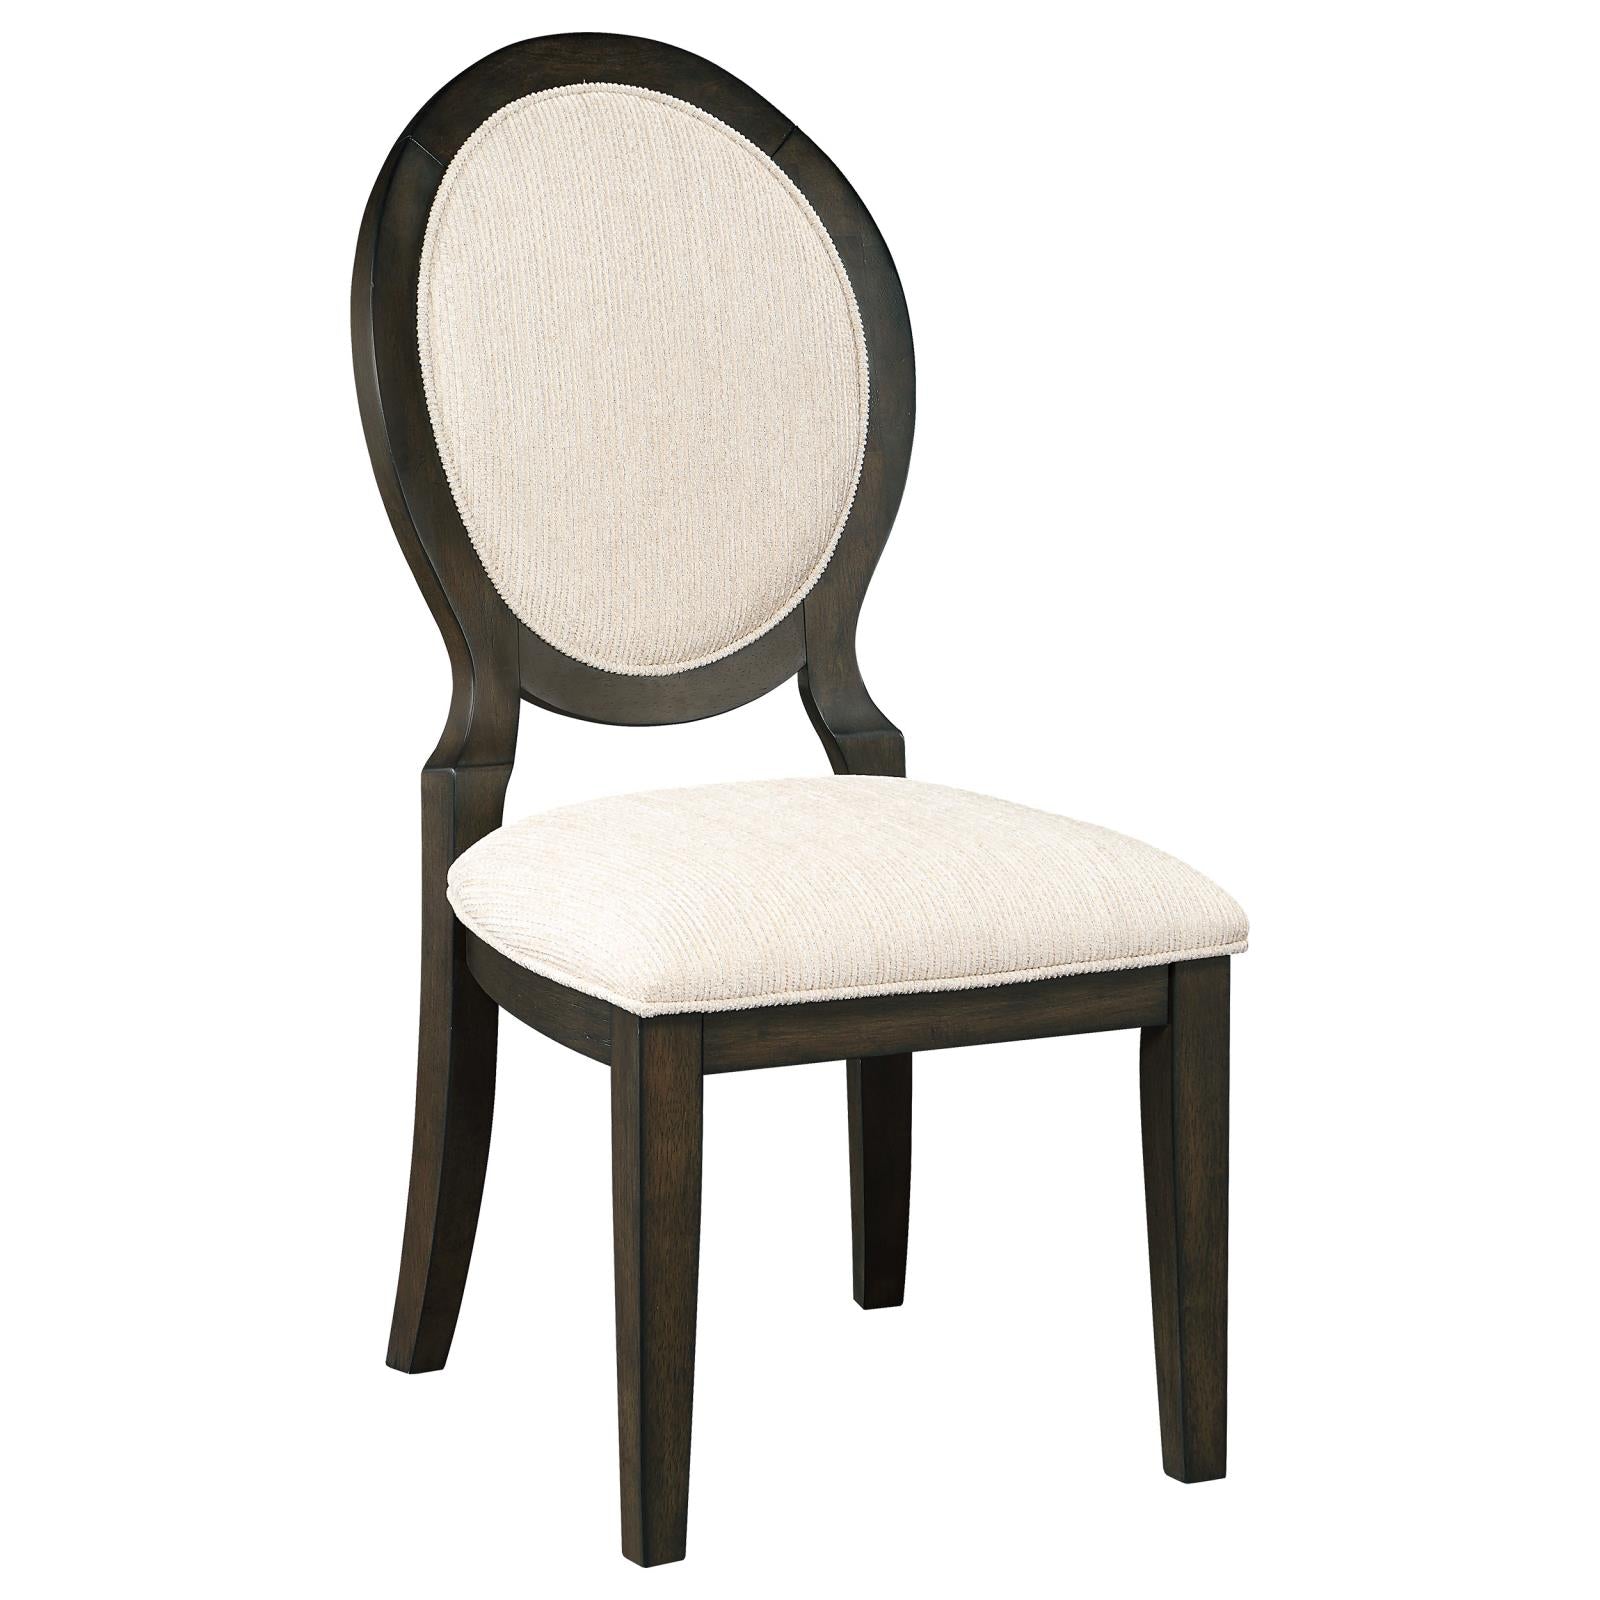 French Oval Back Dining Chairs